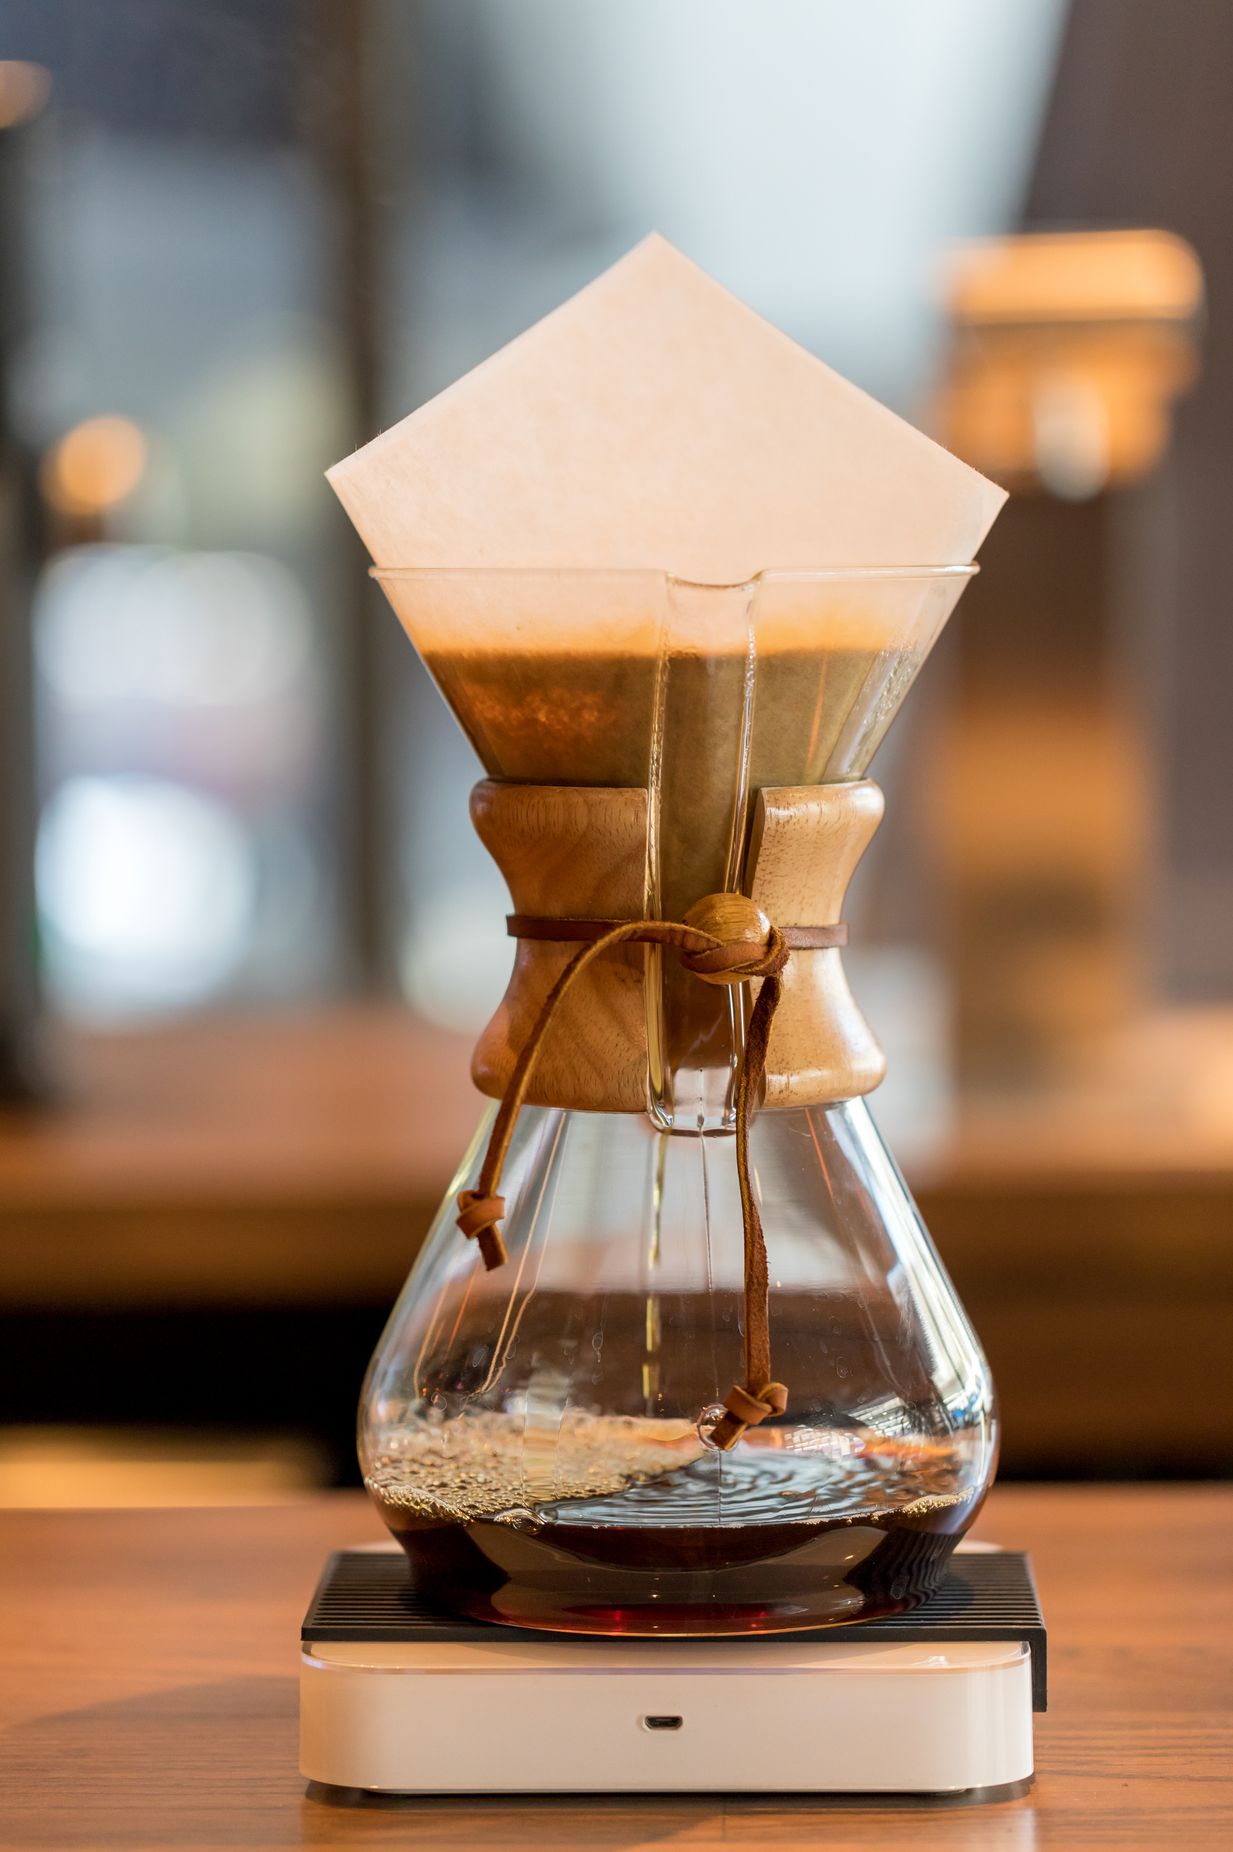 bangkok, thailand jan 18, 2018 brewing third wave coffee with chemex glass in the coffee shop chemex coffeemaker is a manual, pour over style glass container coffeemaker